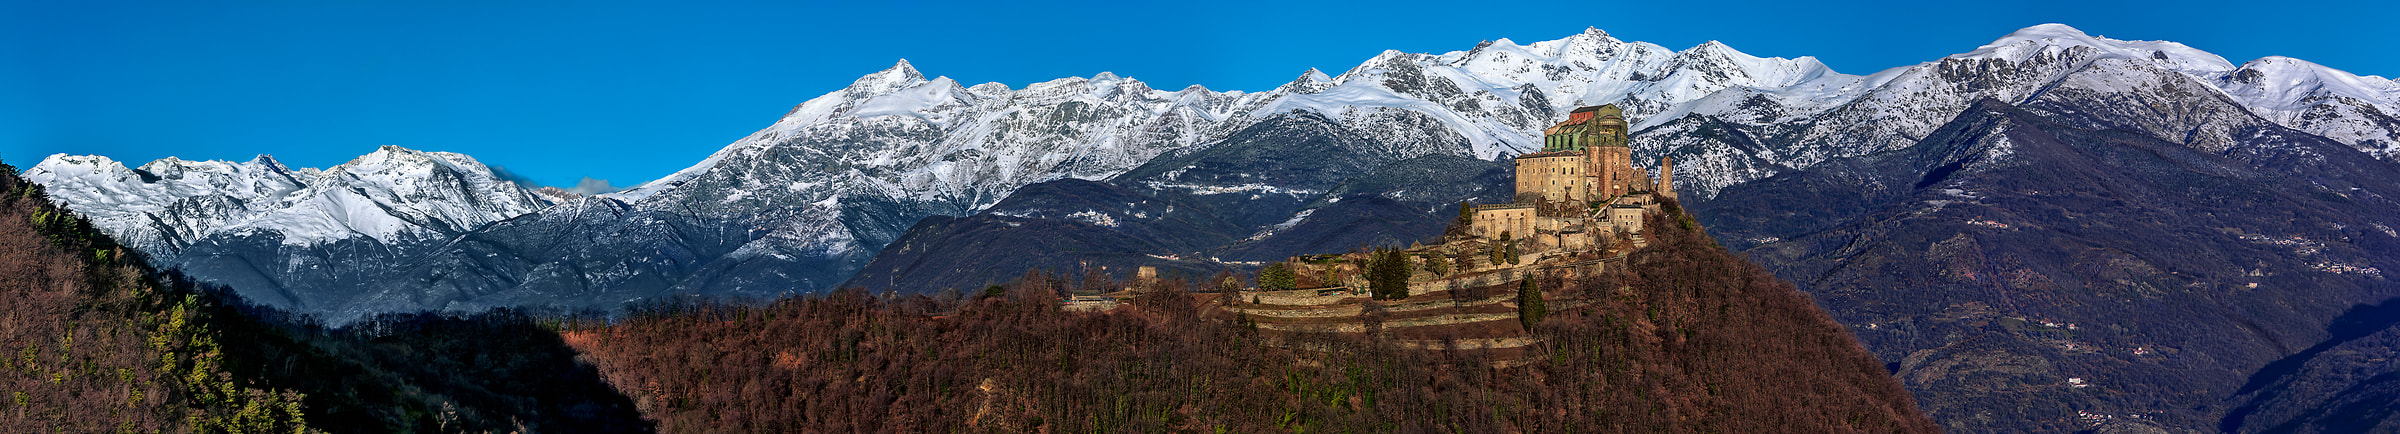 540 megapixels! A very high resolution, large-format VAST photo print of a church amid the mountains of the Alps; landscape panorama photograph created by Duilio Fiorille in Sant'Ambrogio di Torino, Piedmont, Italy